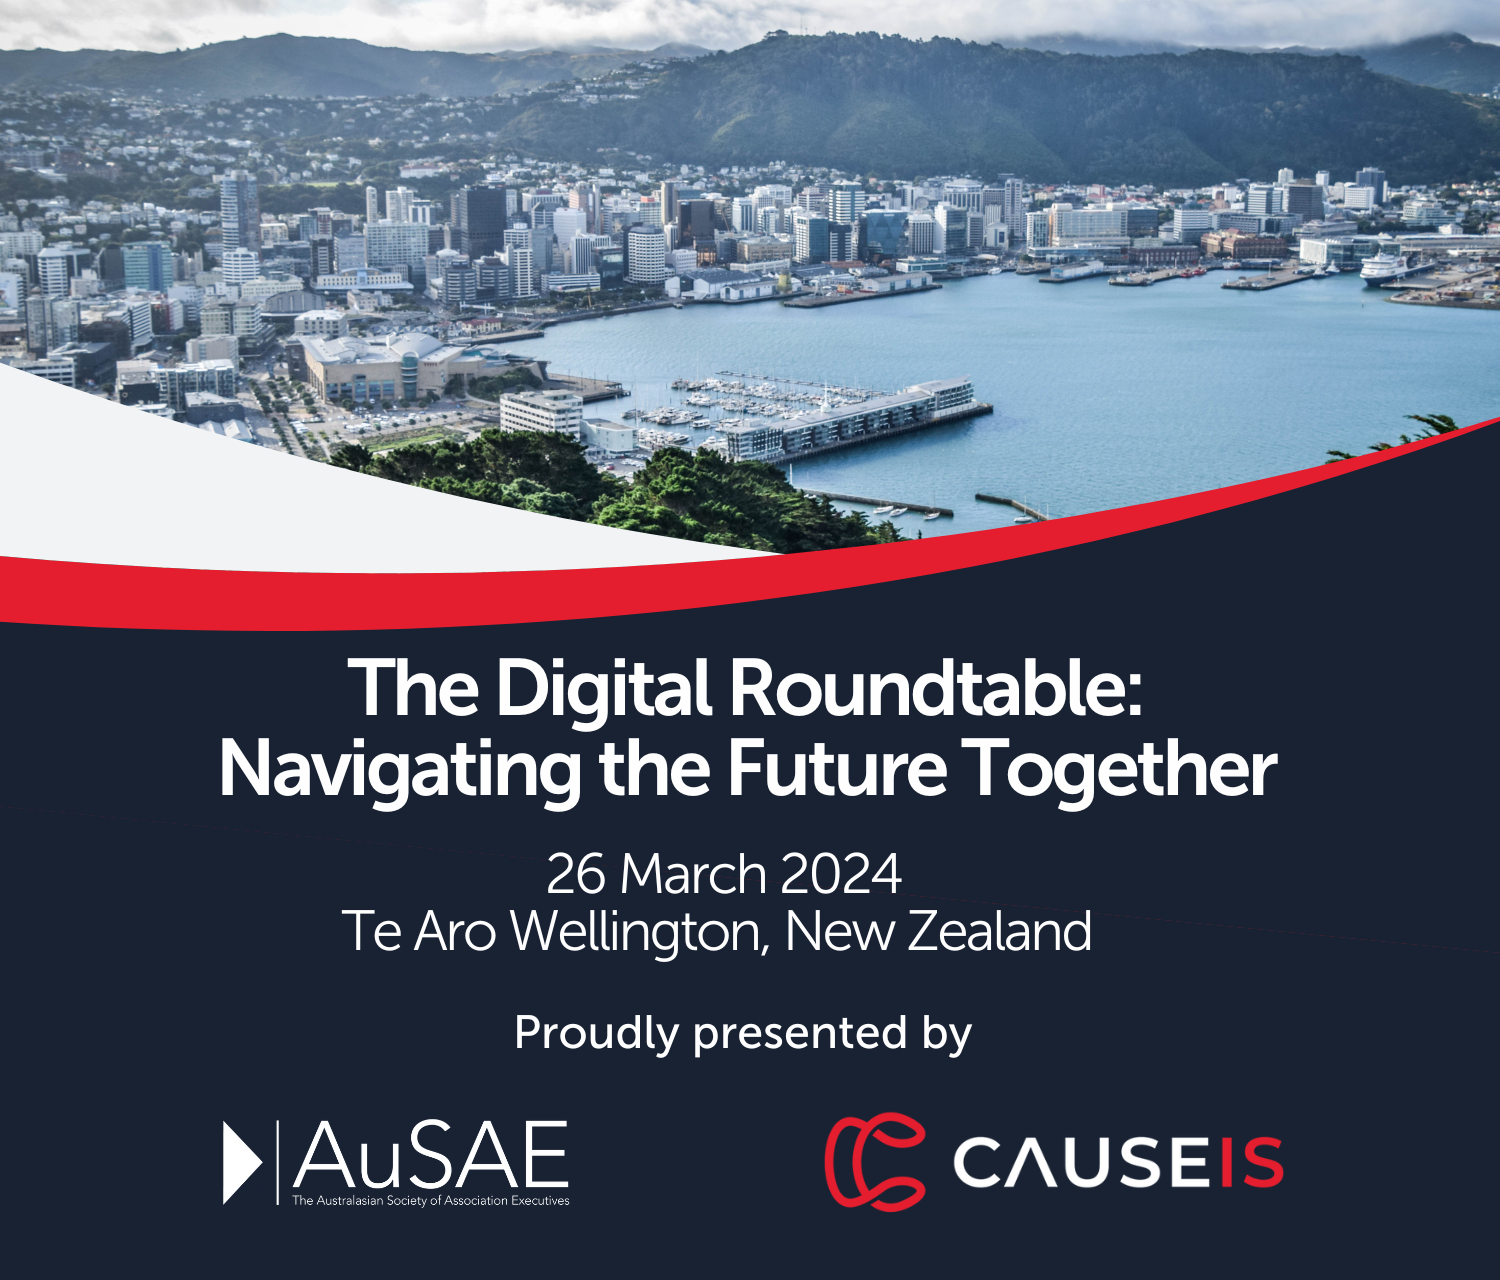 The Digital Roundtable: Navigating the Future Together